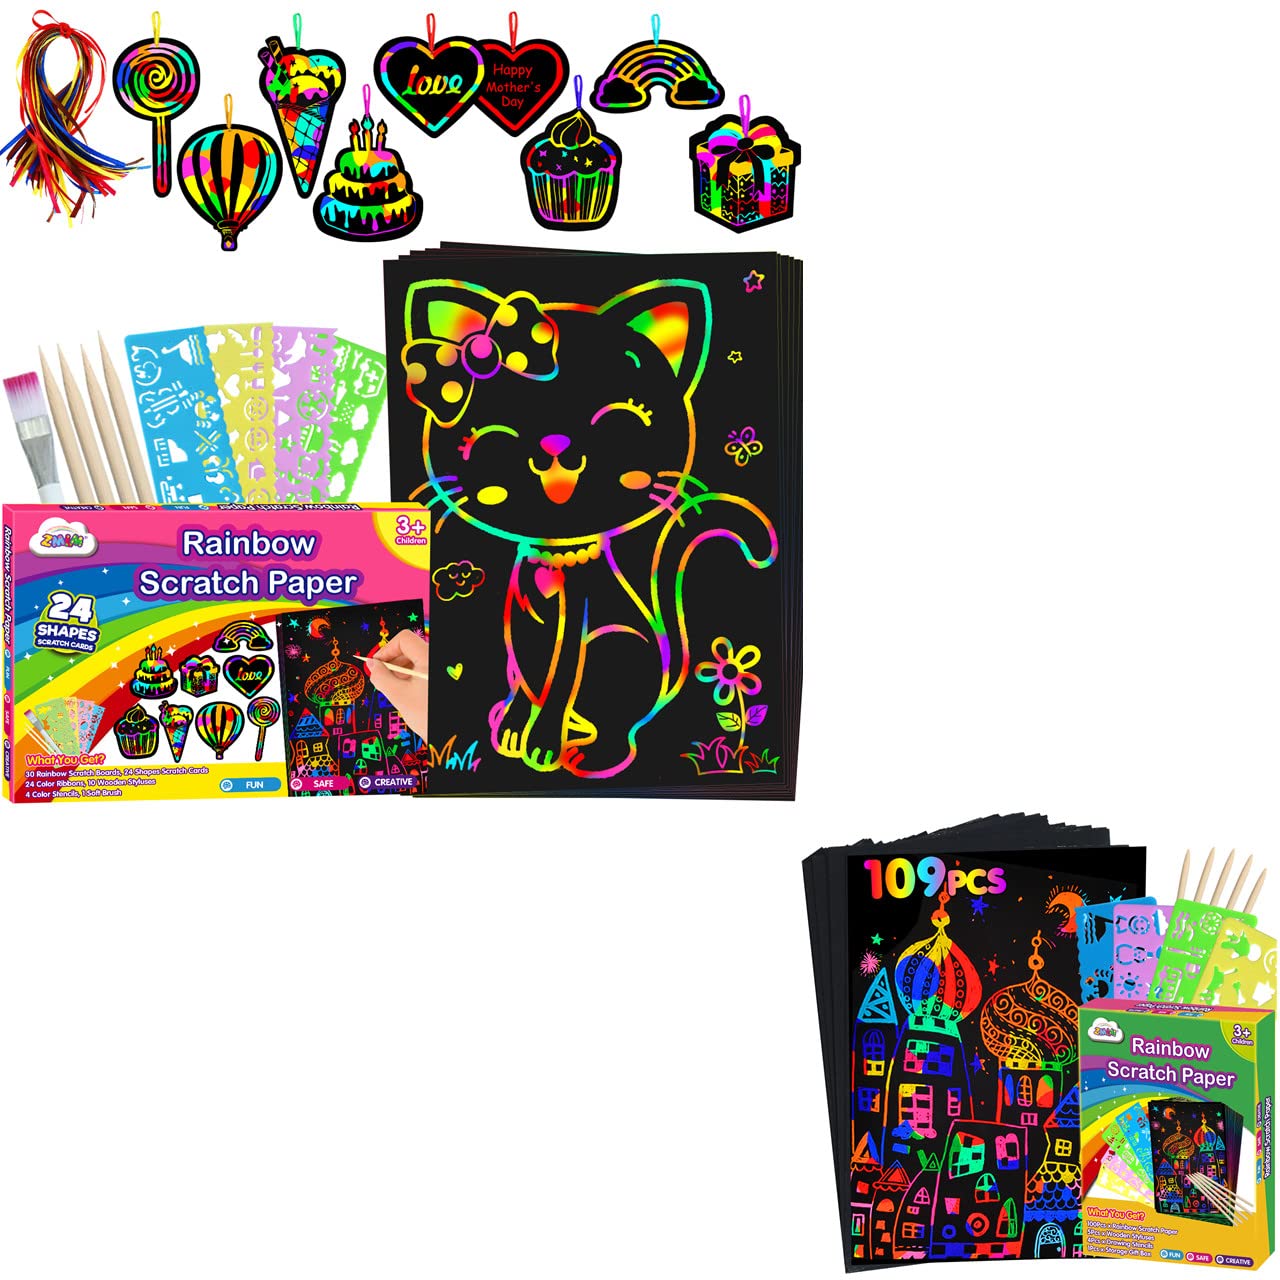 ZMLM Scratch Paper Art-Craft Kids: Rainbow Scratch Magic Drawing Set Paper Supply Kit for Age 3-12 Kids Children Girl Boy DIY Toy Activity Educational|Party Faver|Birthday